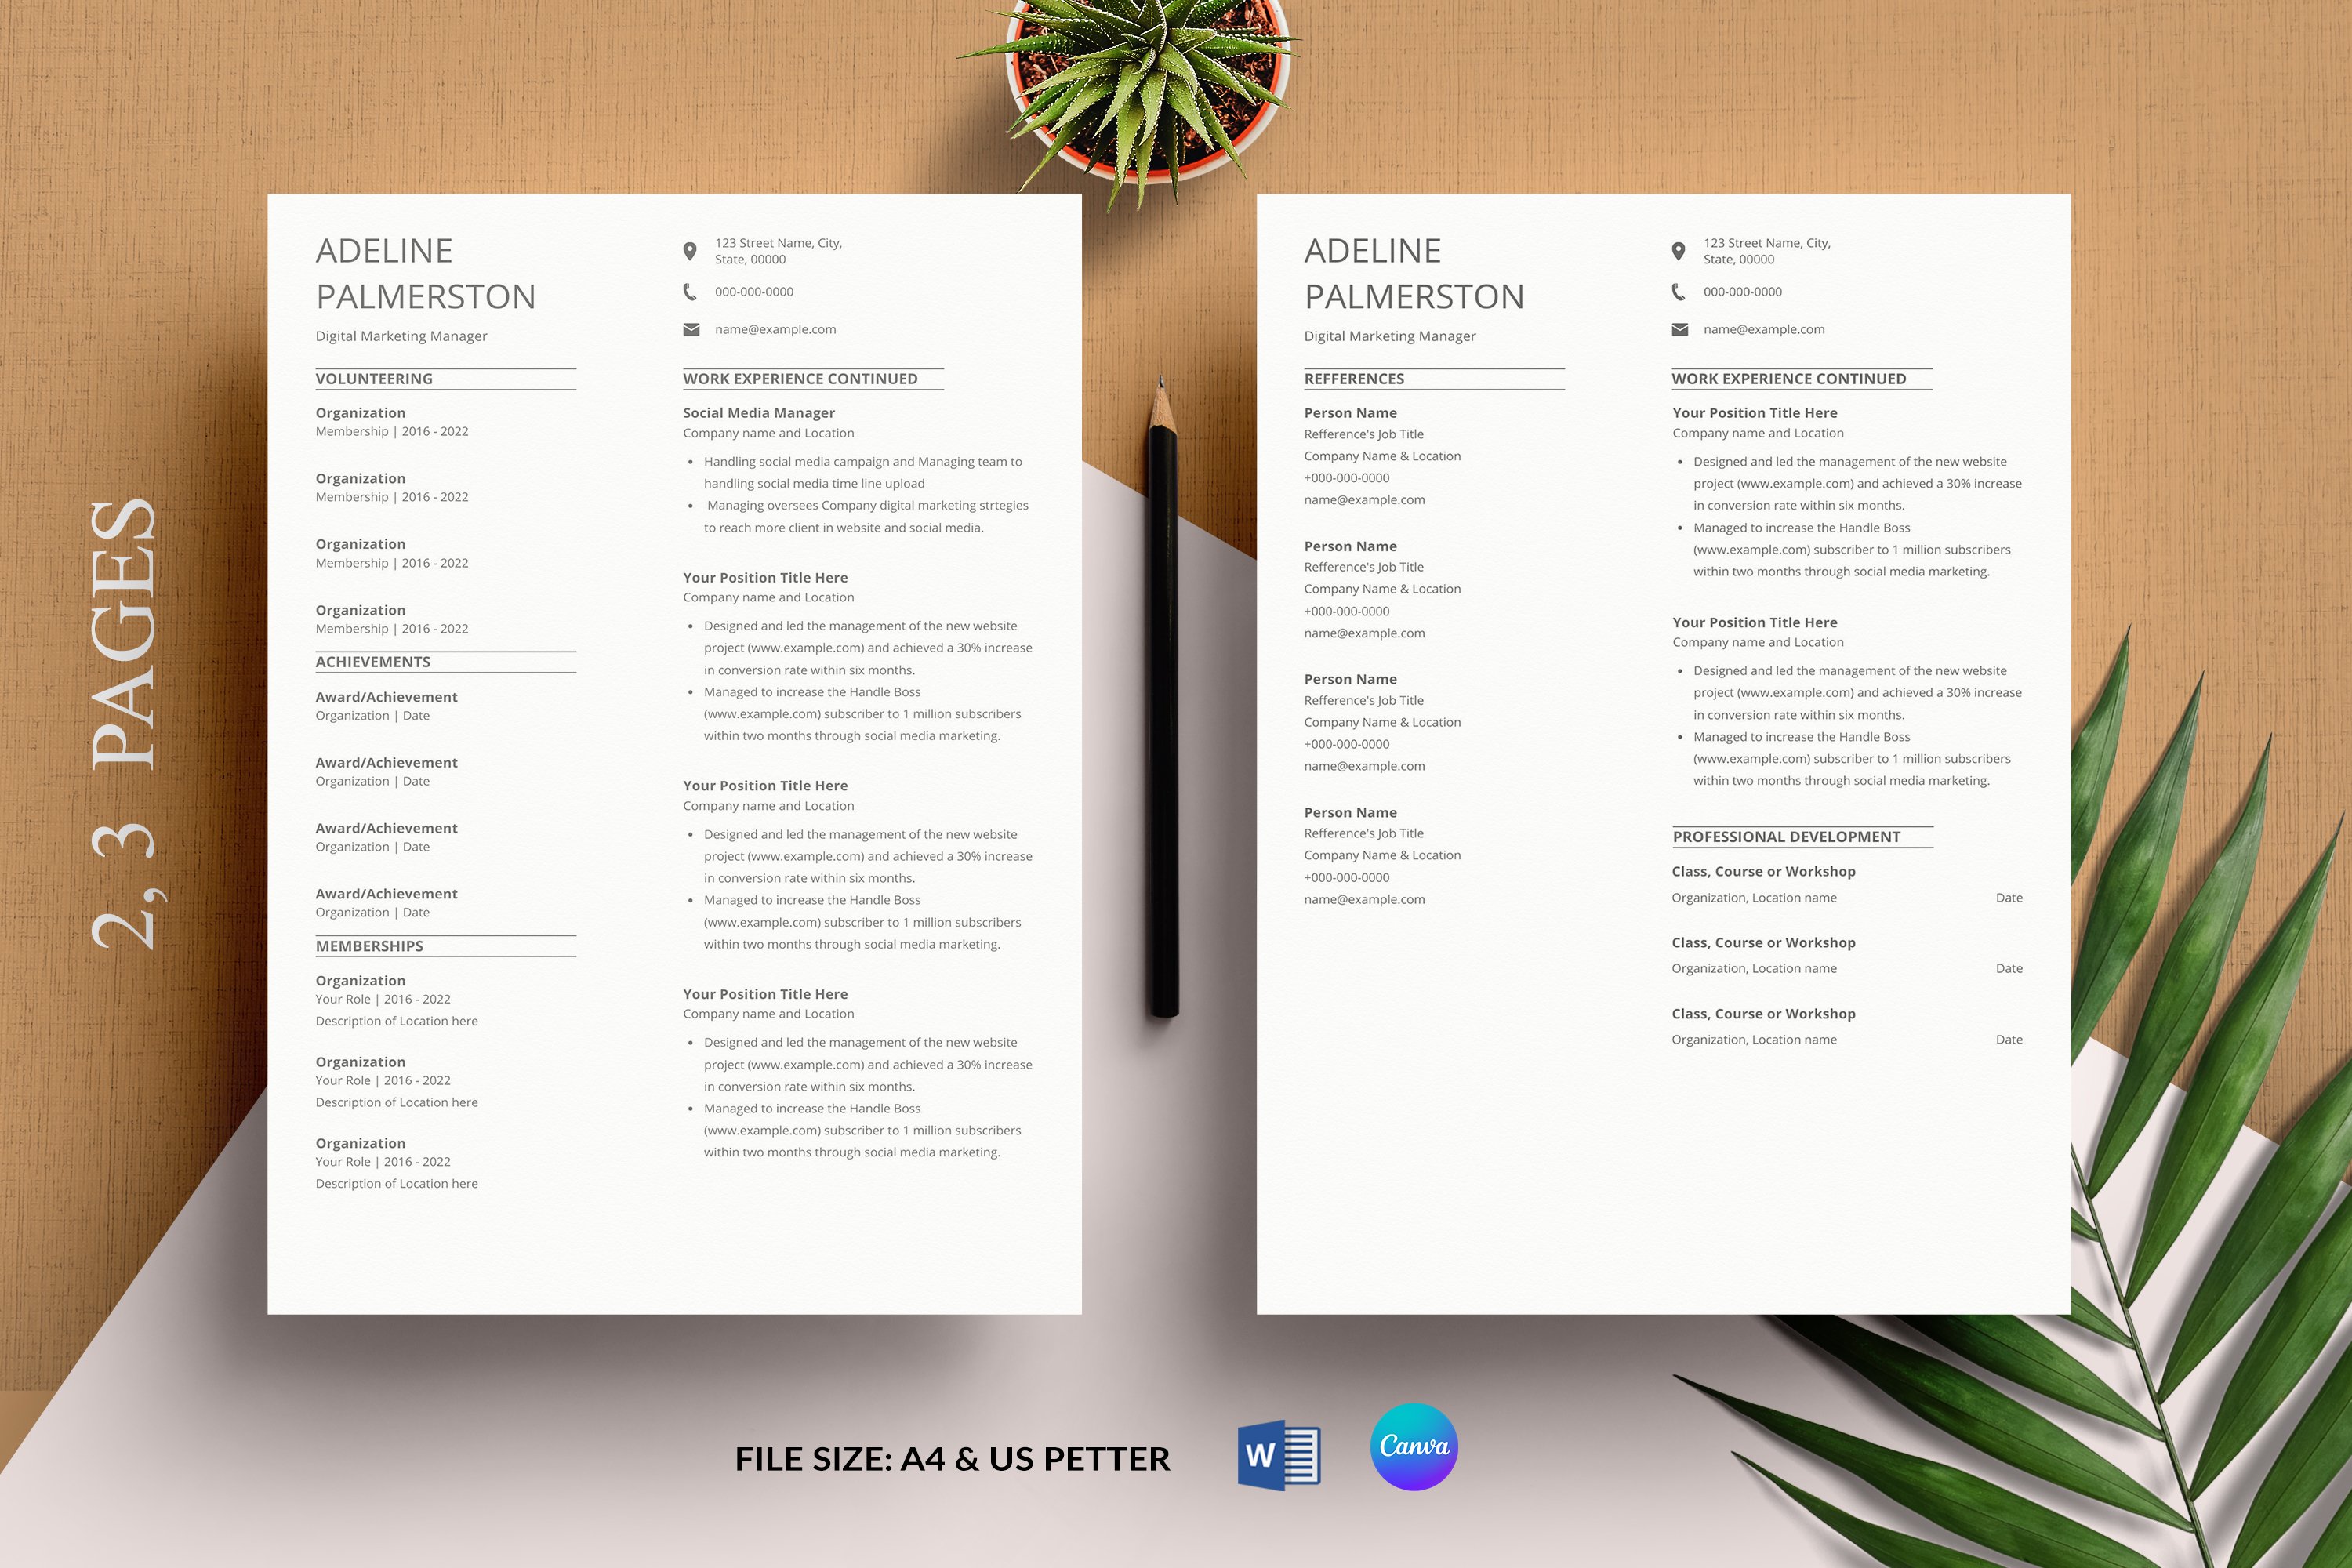 Minimal Resume for Marketing Manager preview image.